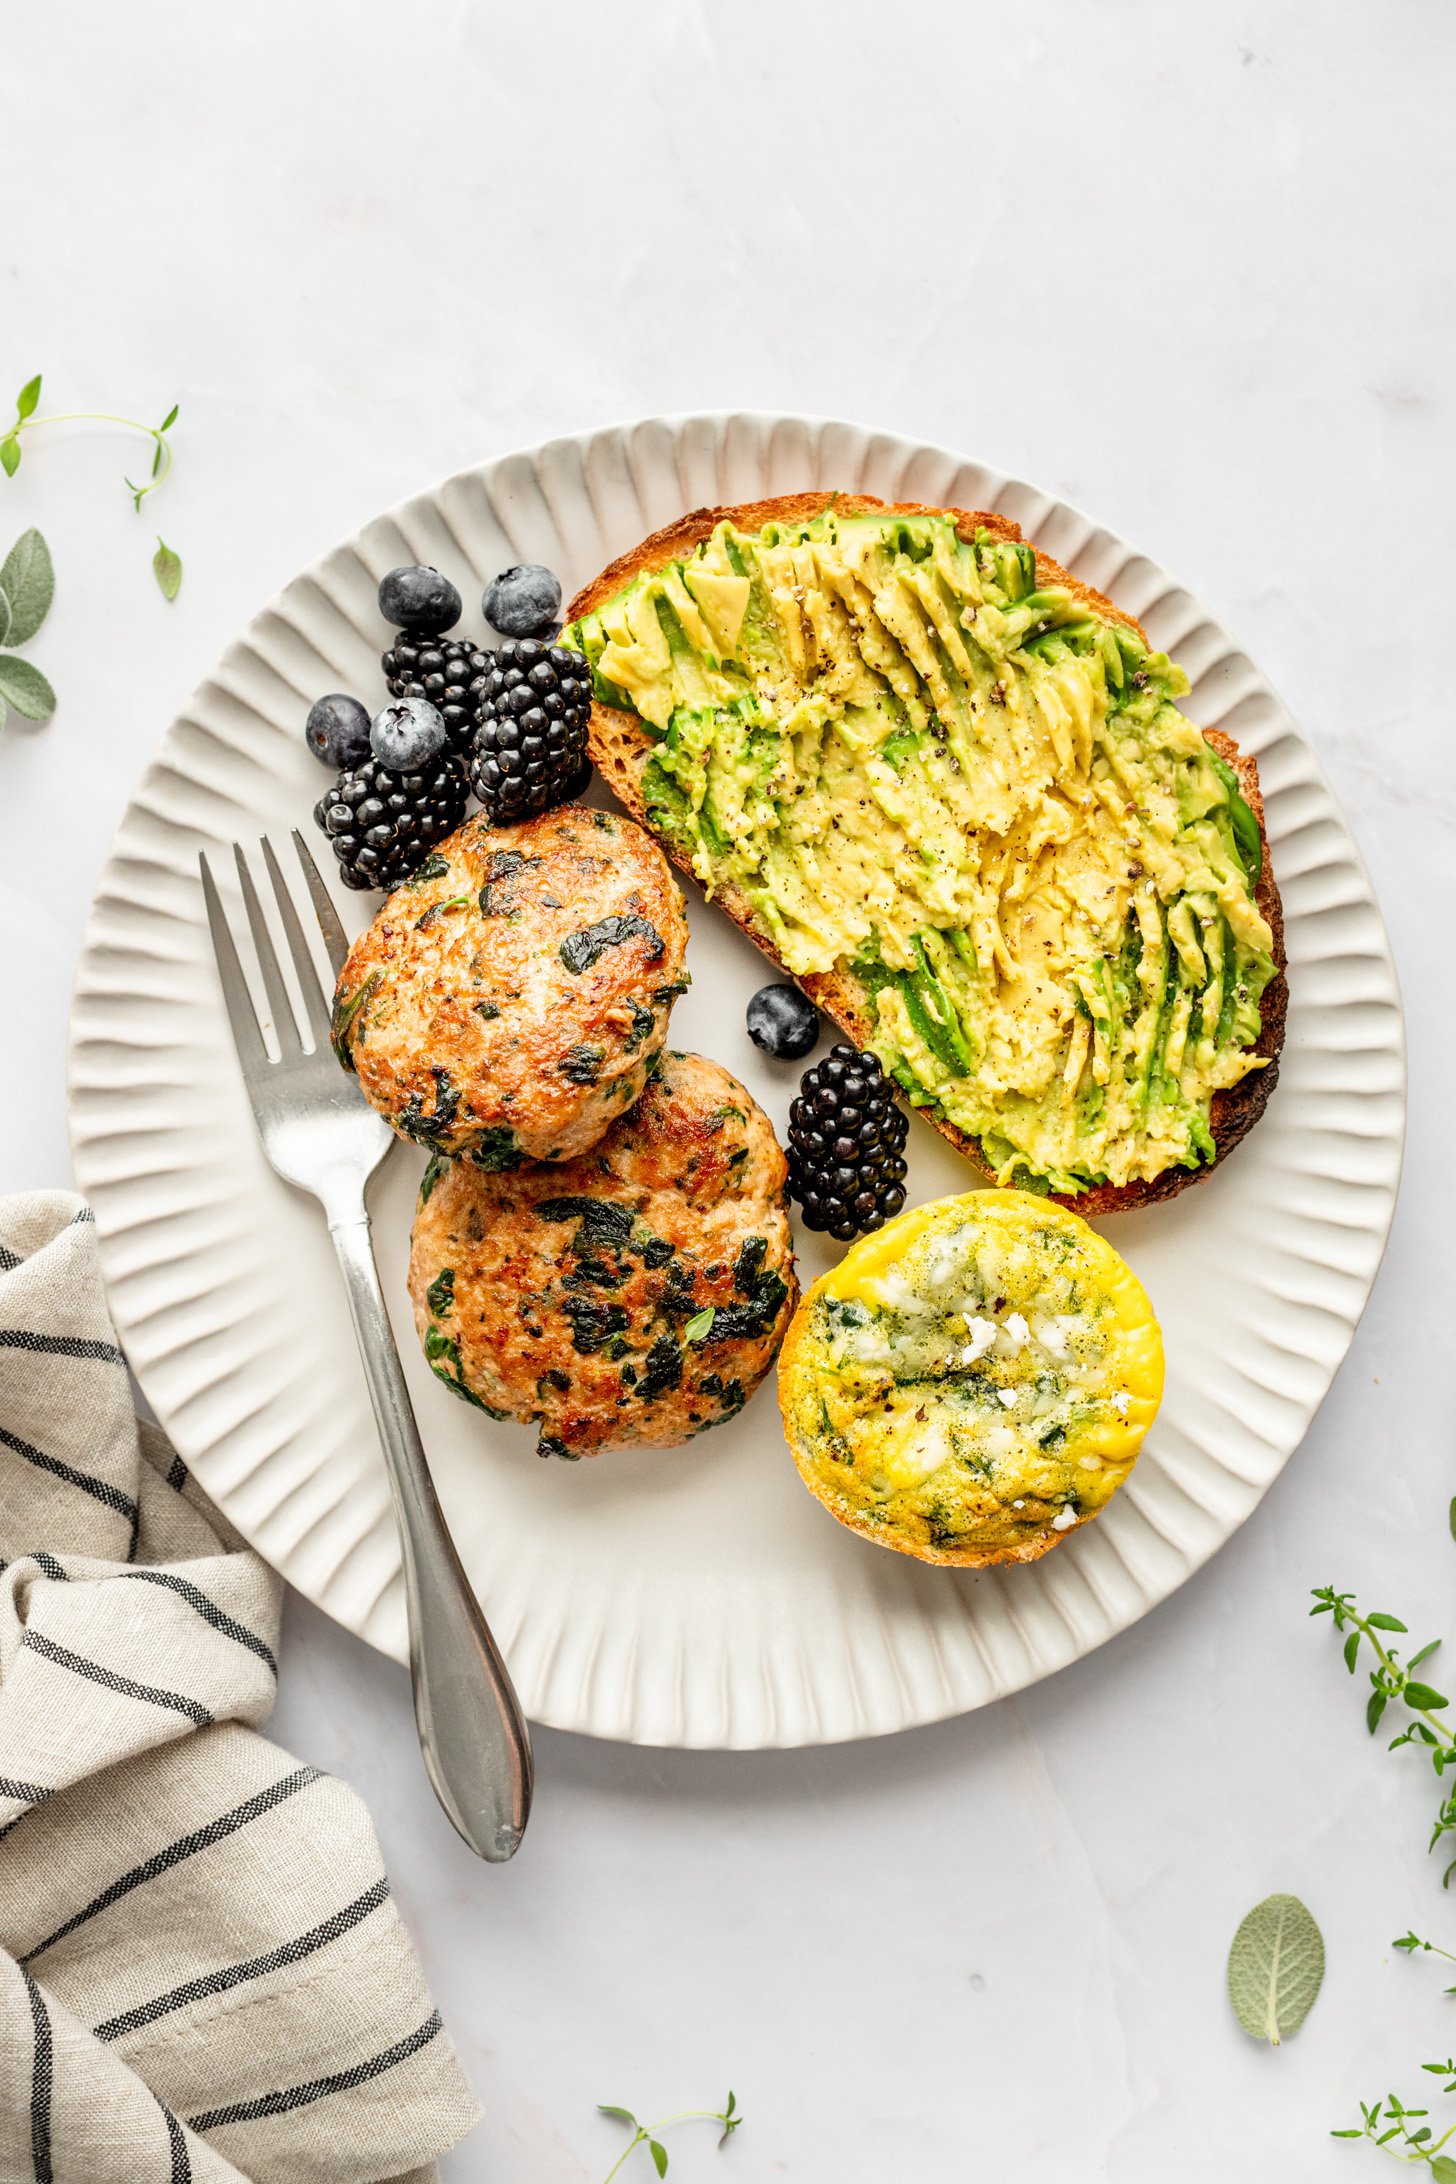 Two spinach & ground turkey breakfast Sausage patties surrounded by an egg "muffin", blackberries, blueberries, and avocado toast, and a fork on a white plate. A striped napkin, sprigs of thyme and sage leaves surround the plate on a white countertop.